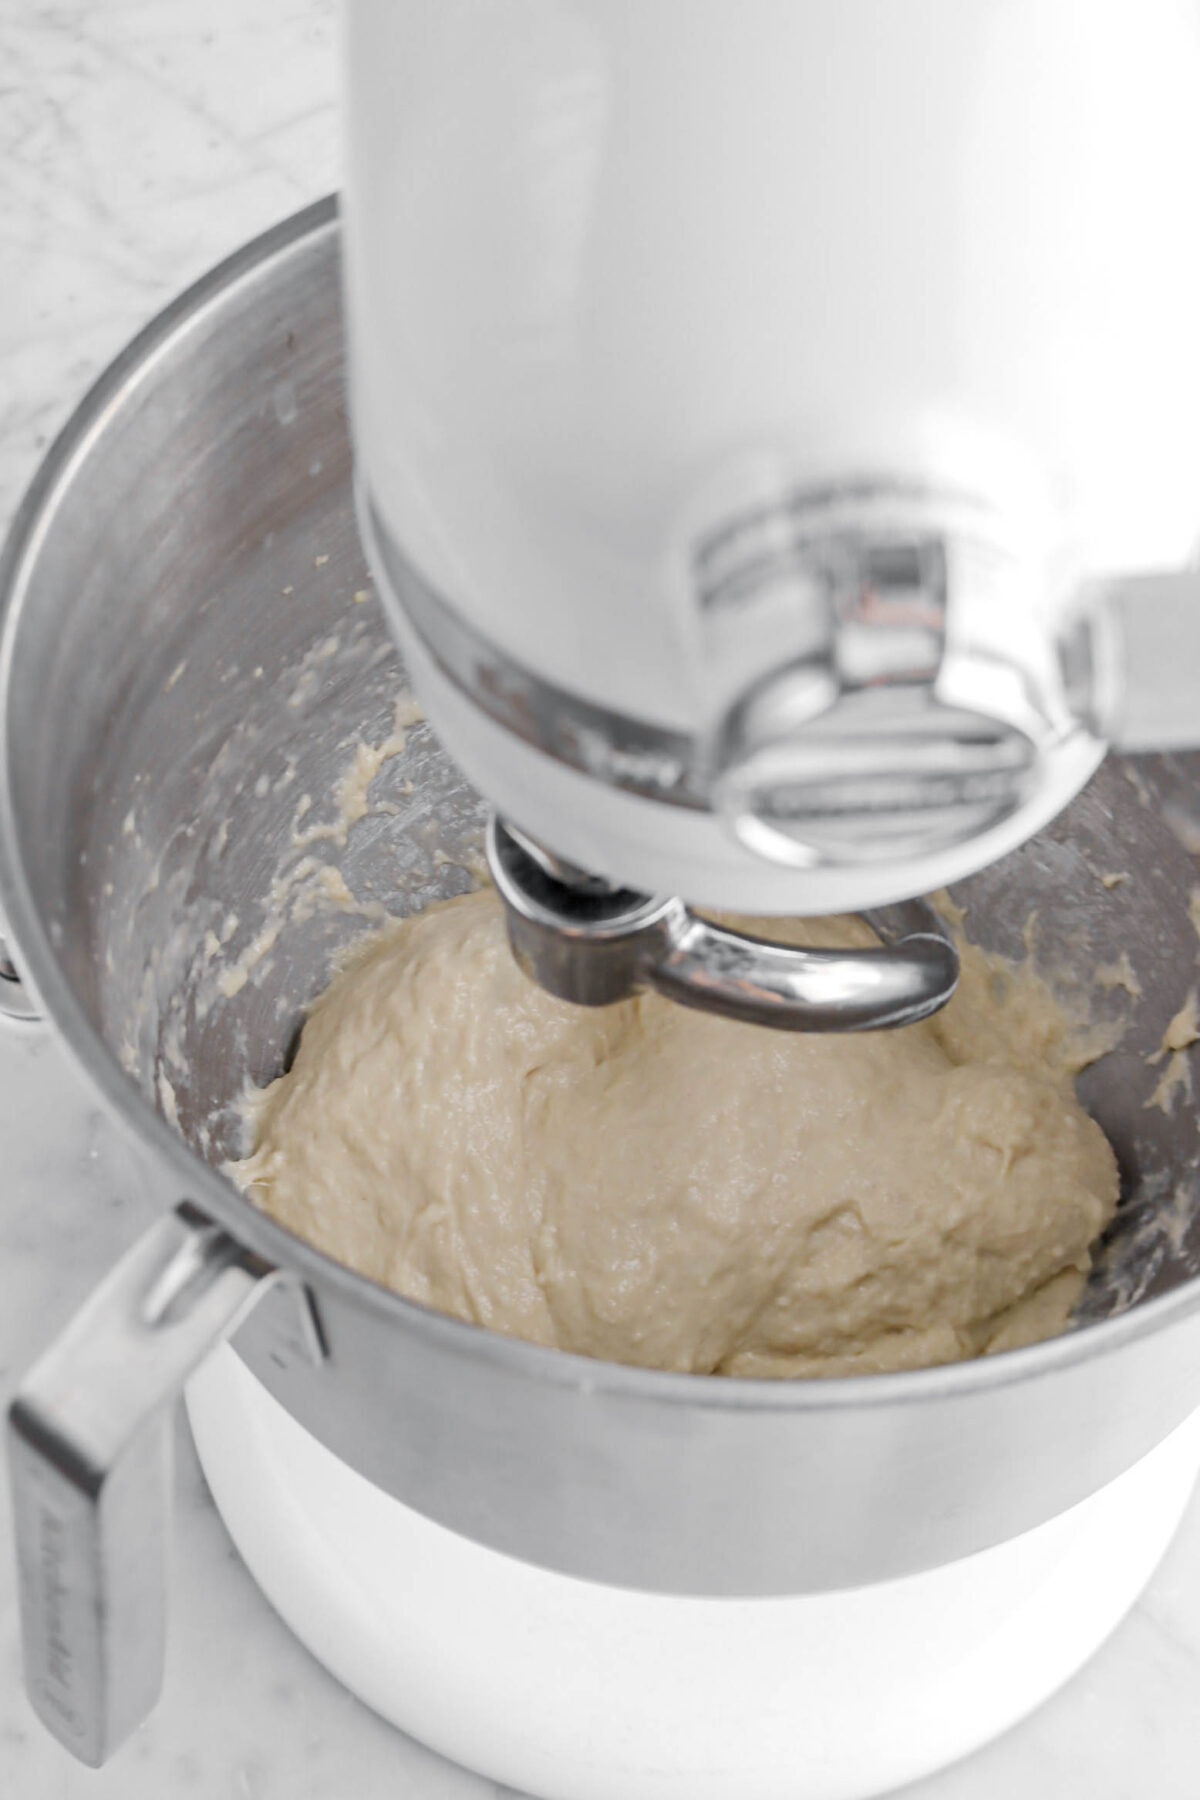 water and dough mixed together.